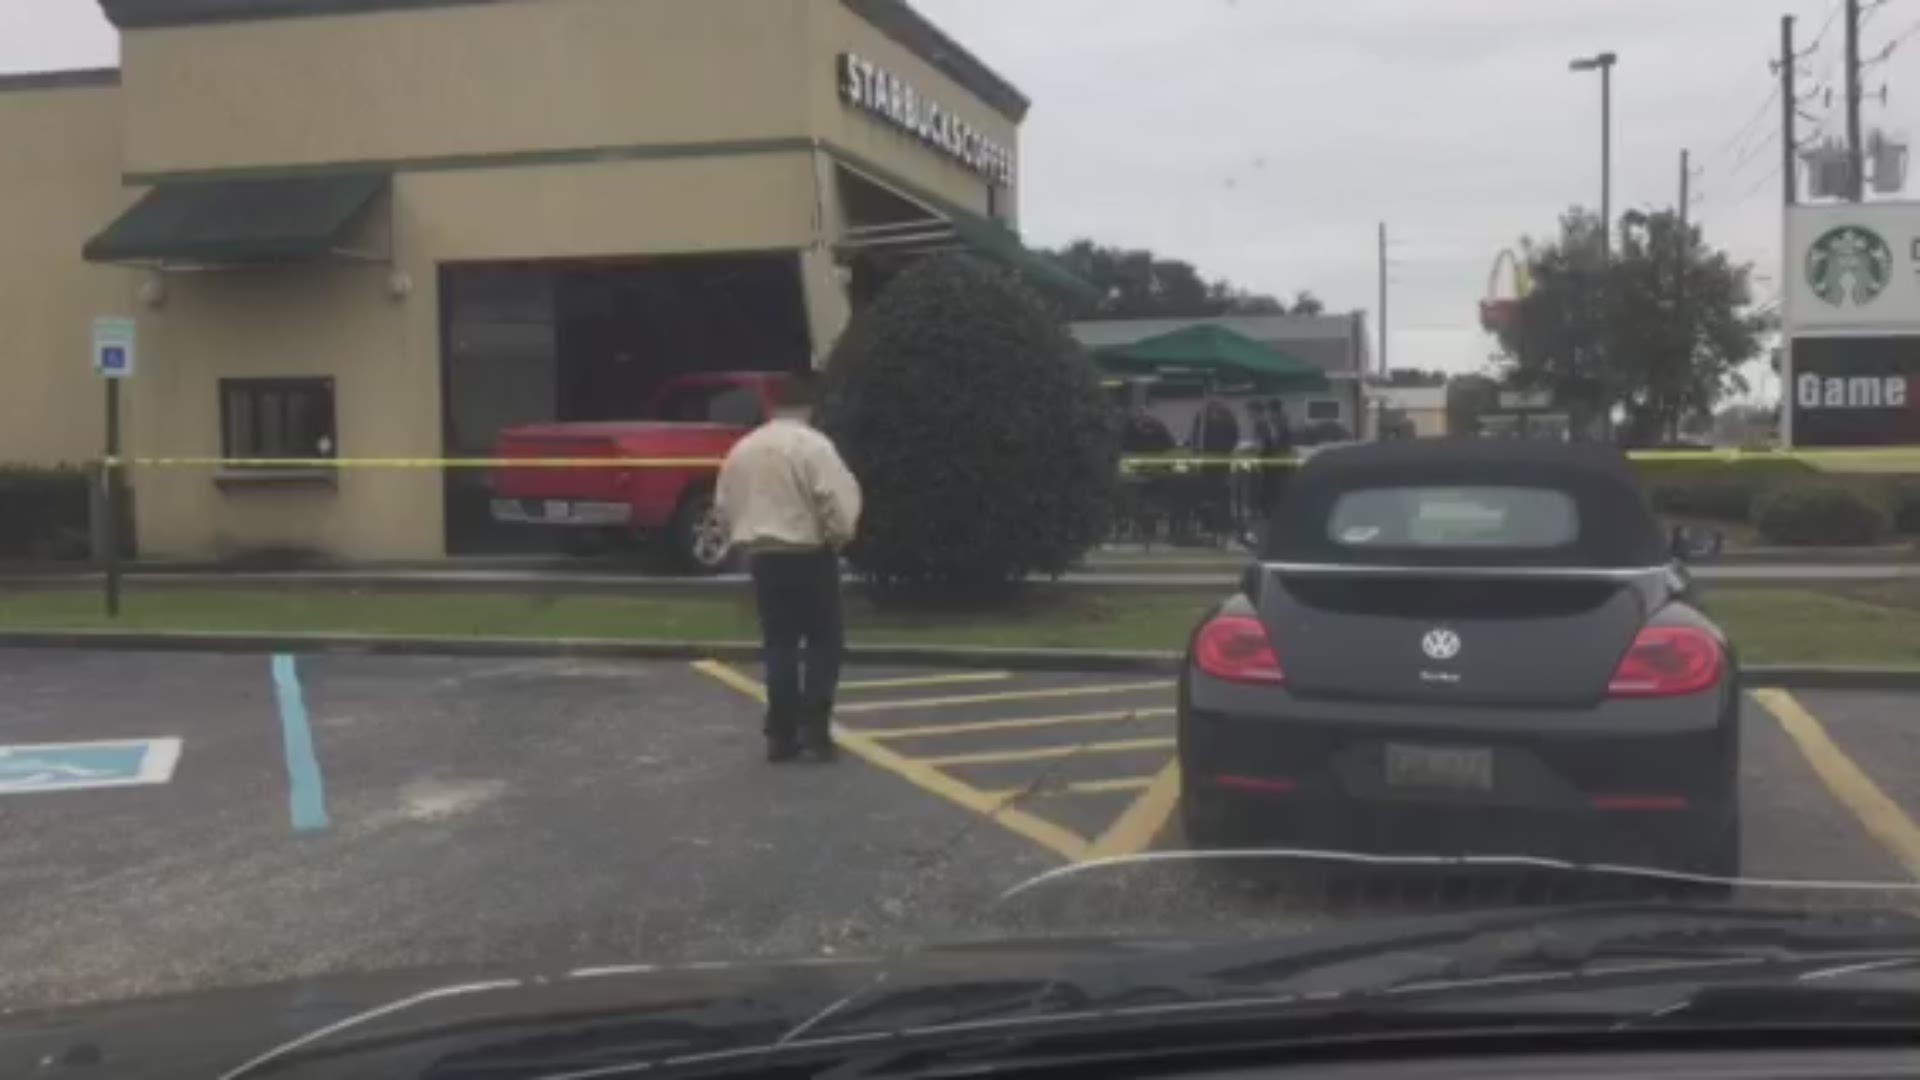 Officials say the vehicle went through a Starbucks on Barataria in Marrero.